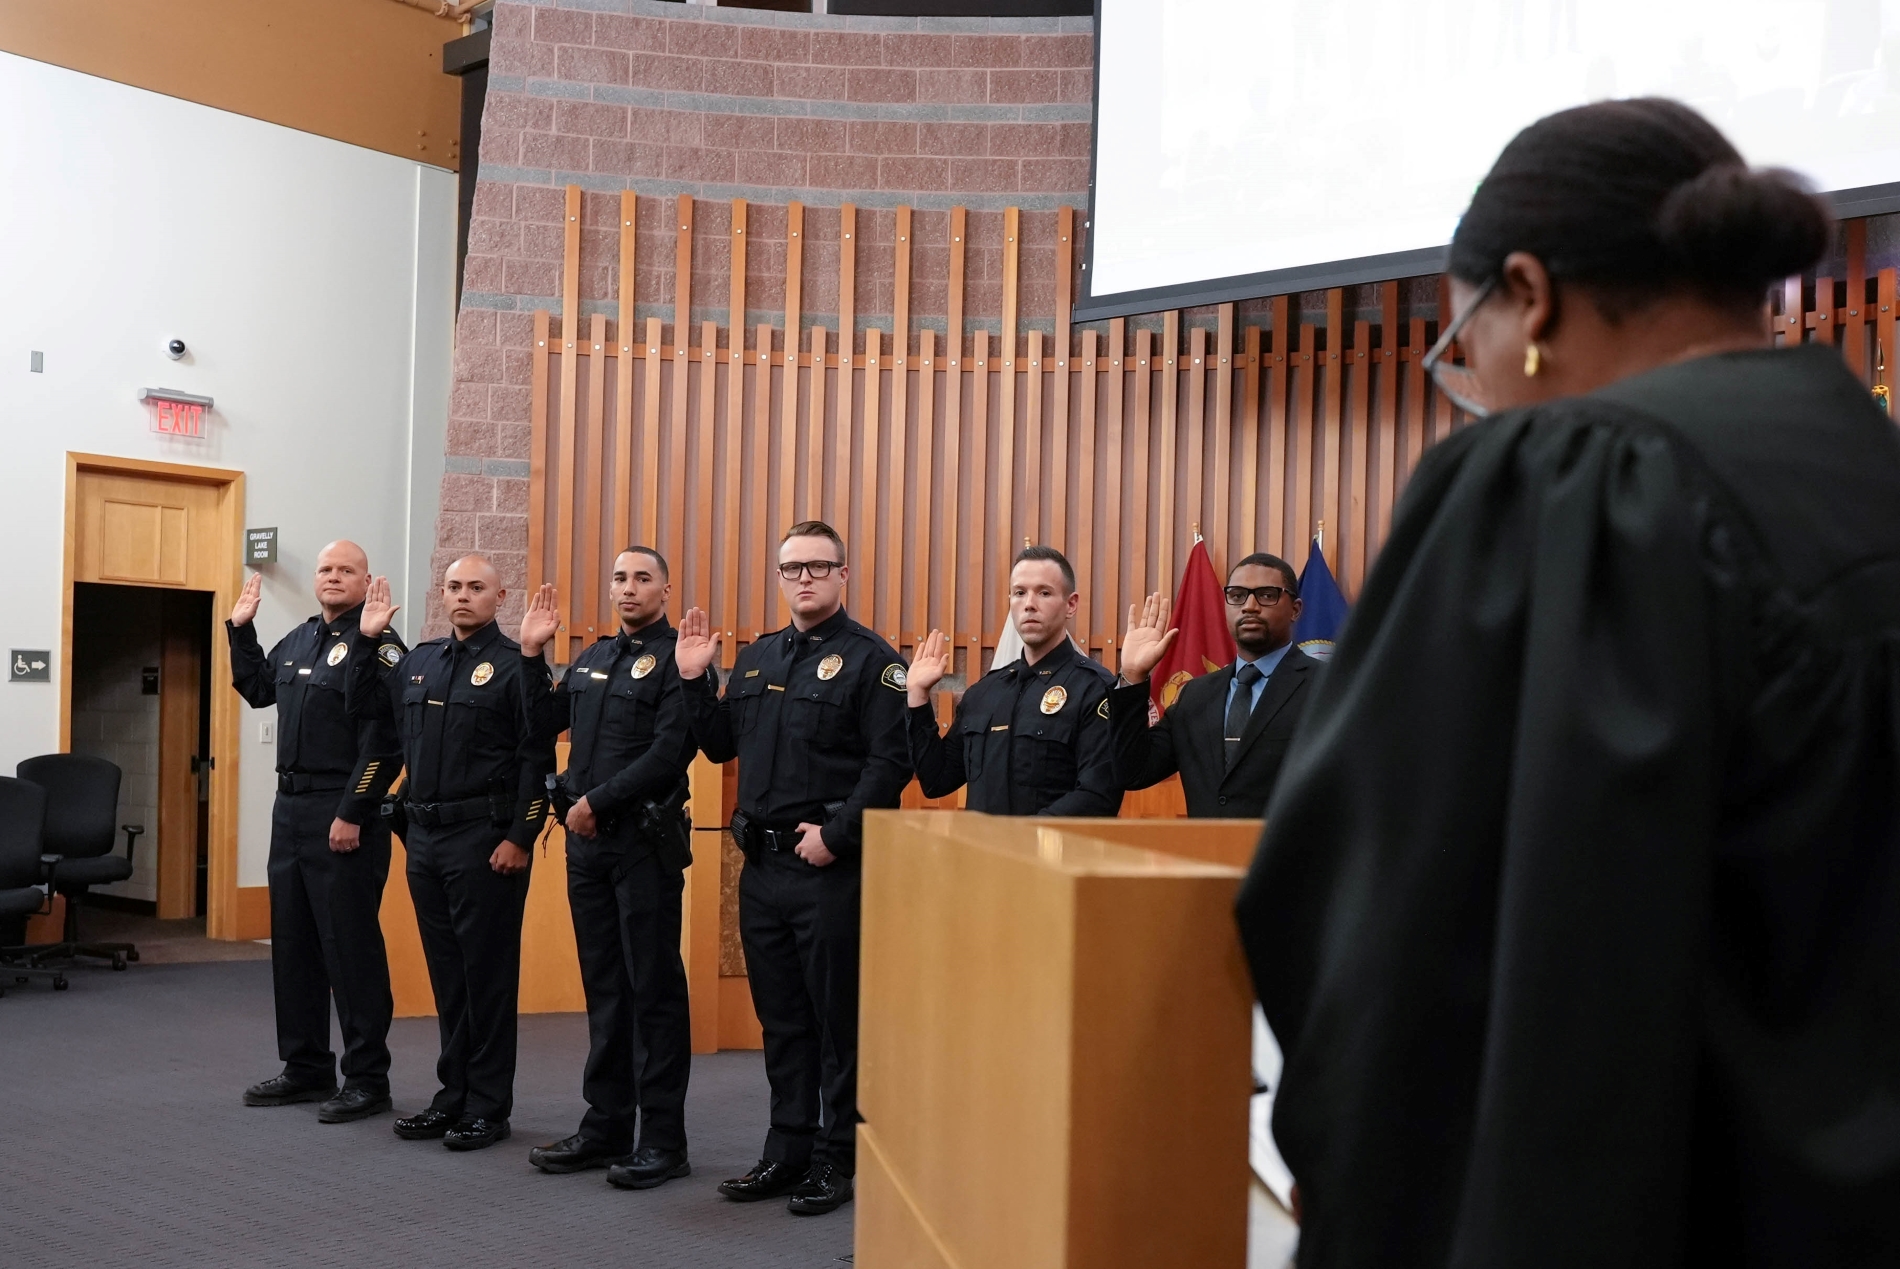 A group of Lakewood Police Officers stand with their hands raised as they are sworn in.